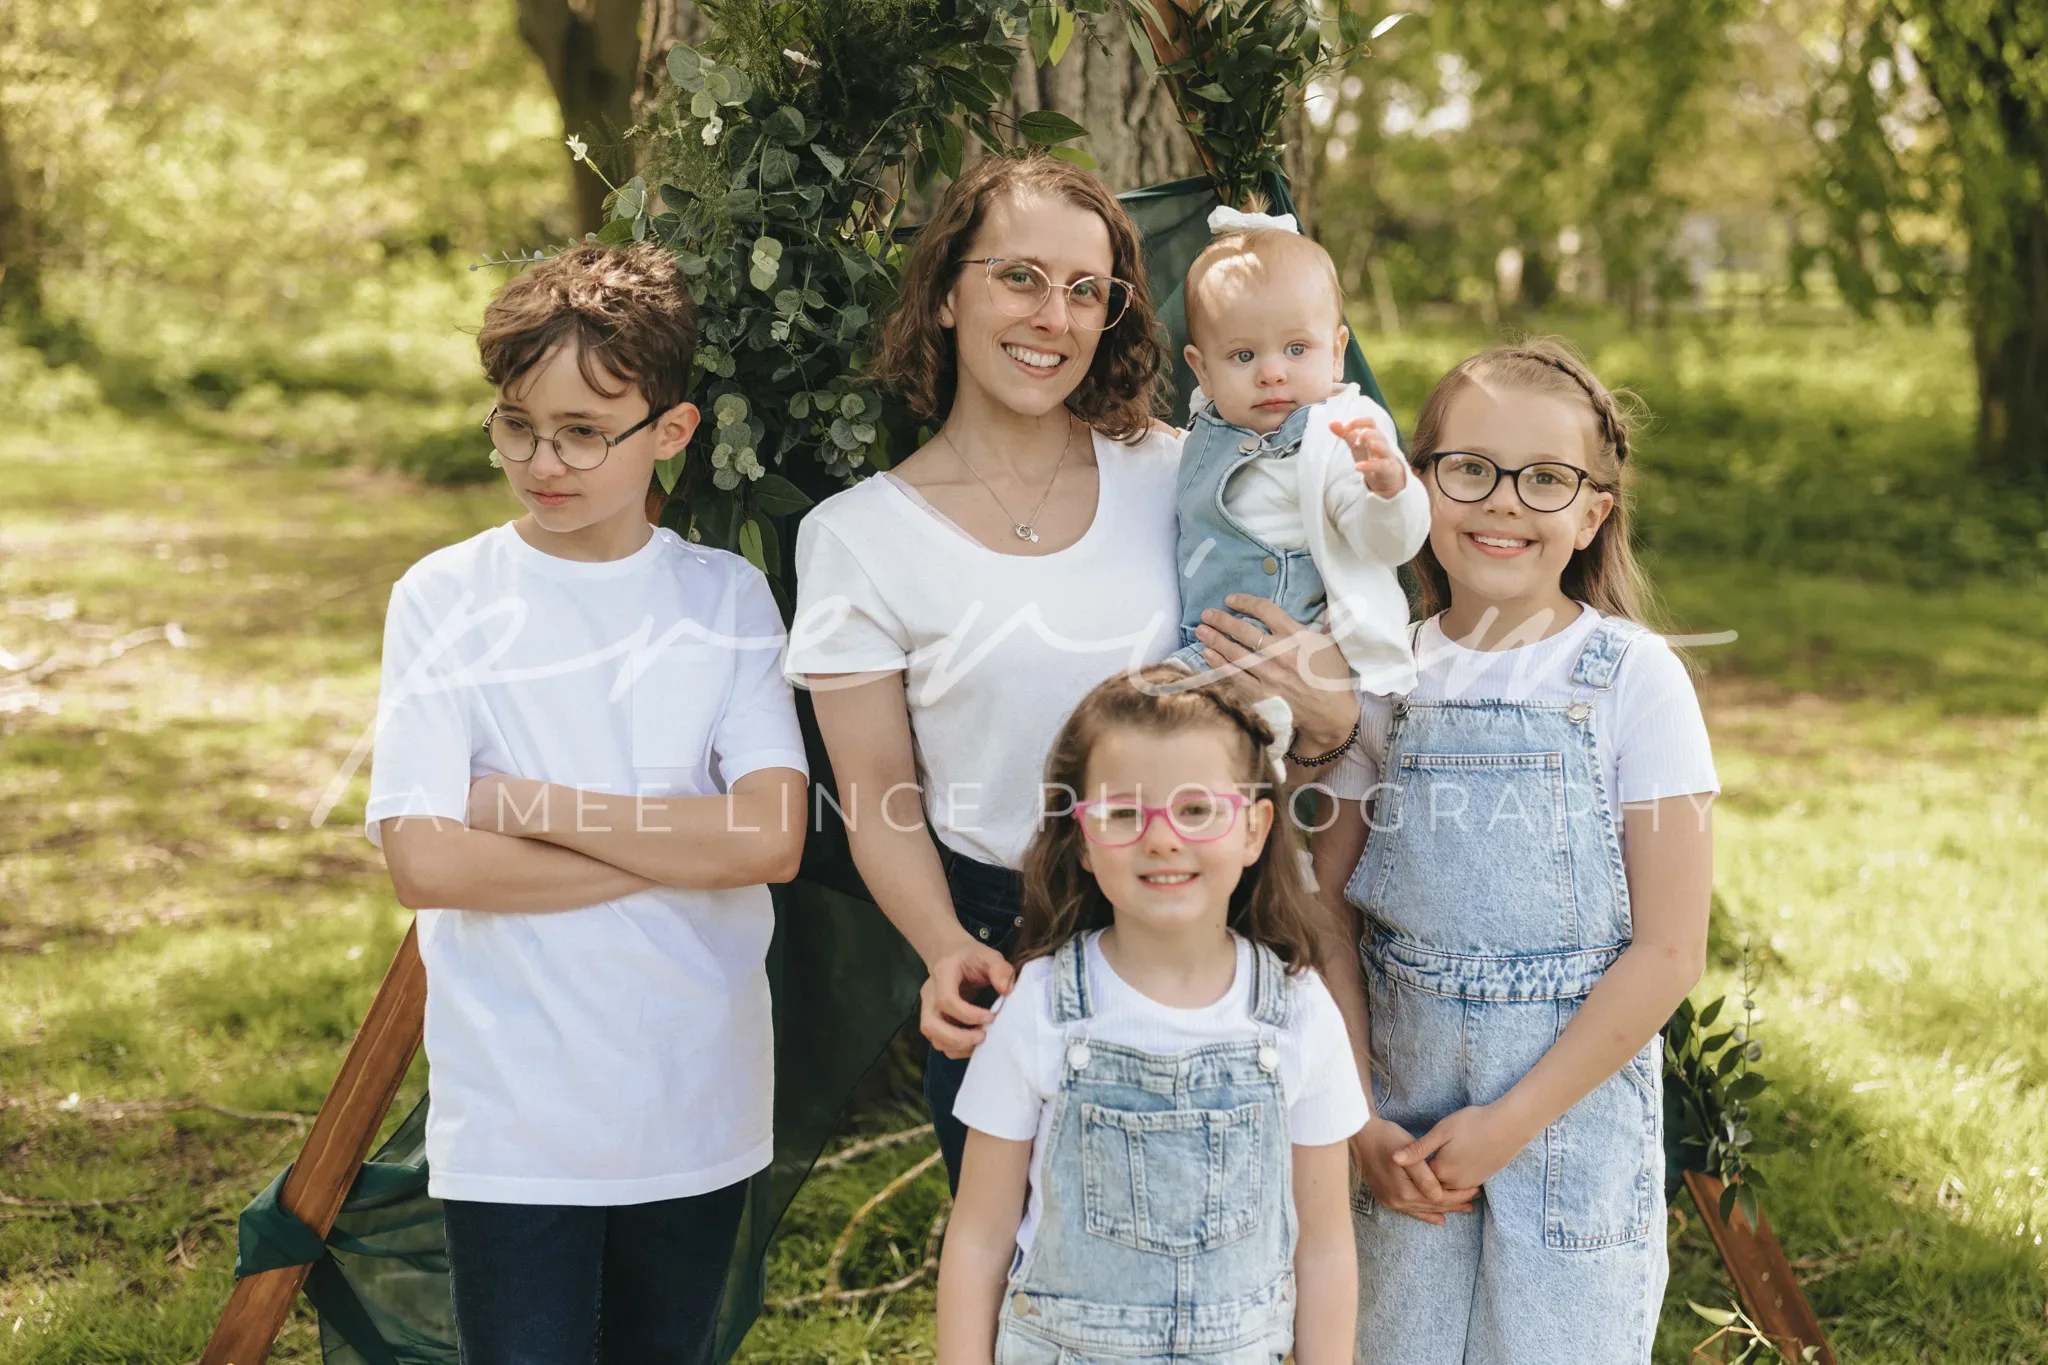 A happy family posing outdoors in a park. a mother holding a baby stands beside three children, two girls and a boy, all smiling. the setting features lush greenery and soft sunlight.